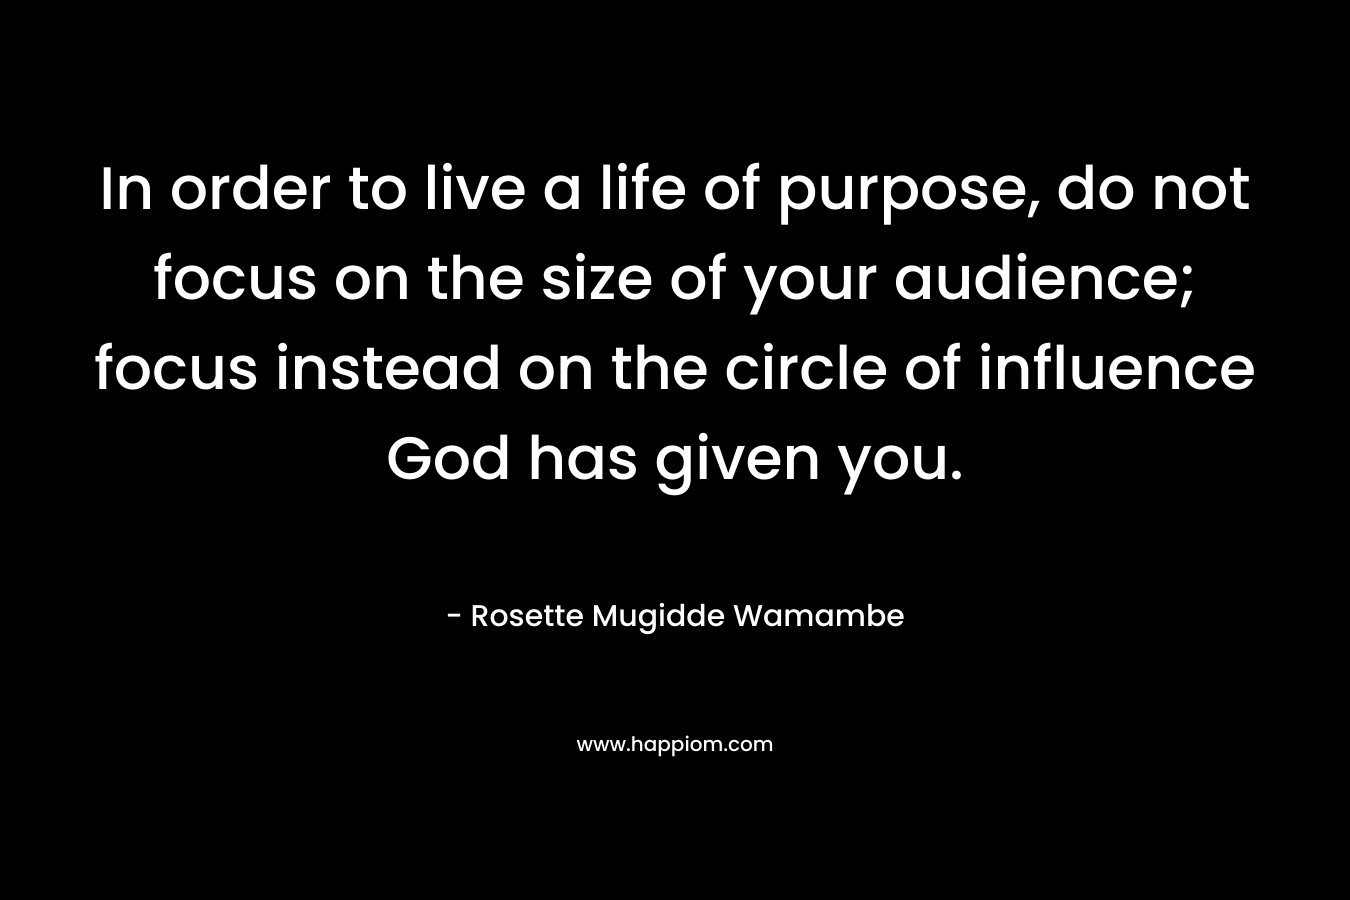 In order to live a life of purpose, do not focus on the size of your audience; focus instead on the circle of influence God has given you. – Rosette Mugidde Wamambe